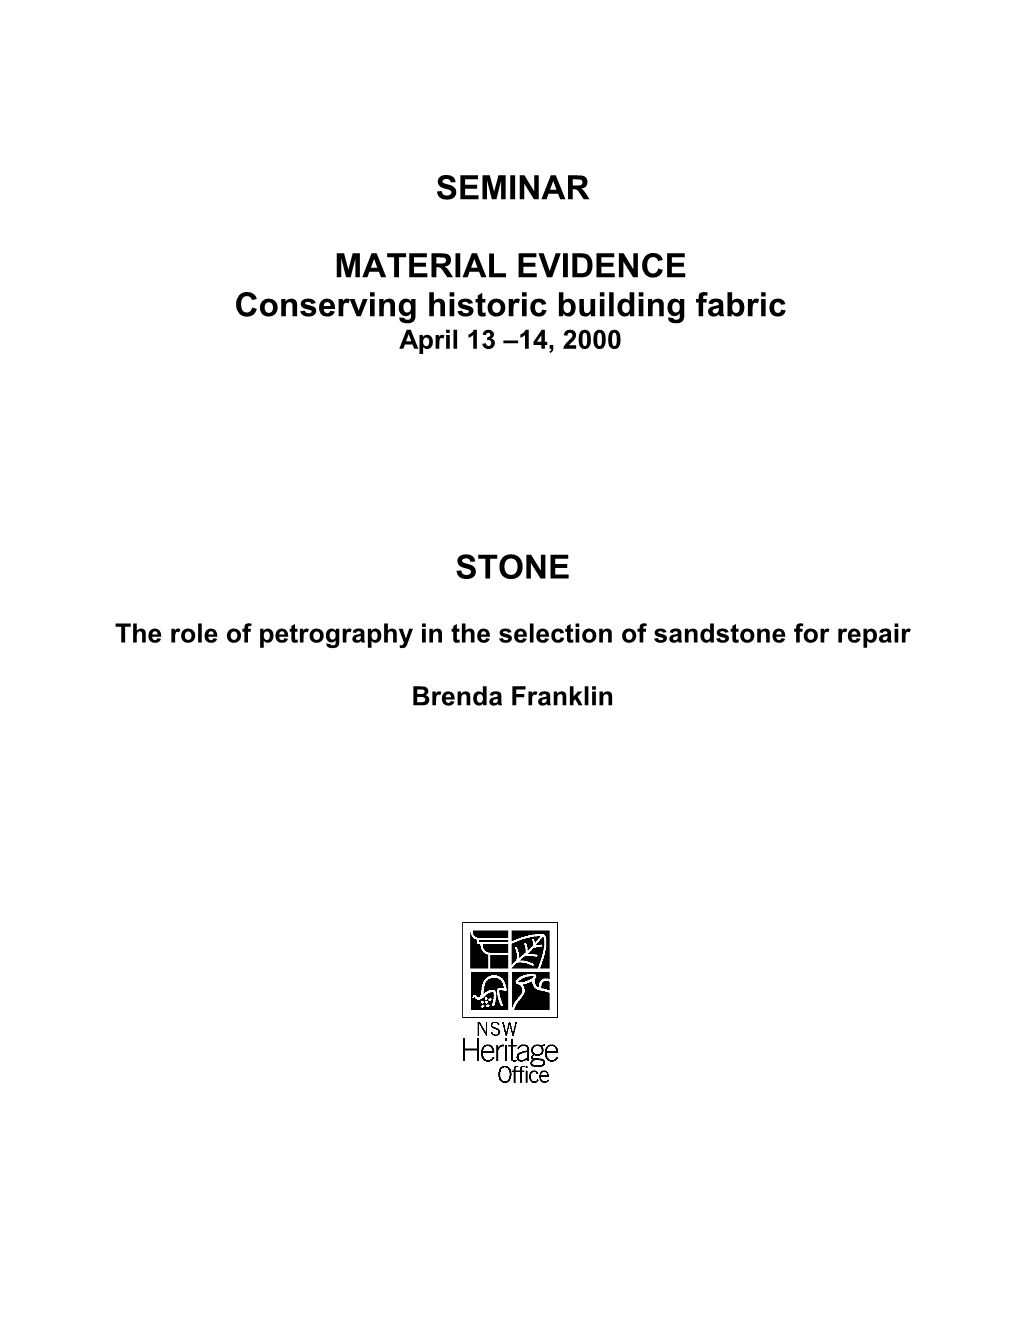 Stone: the Role of Petrography in the Selection of Sandstone for Repair